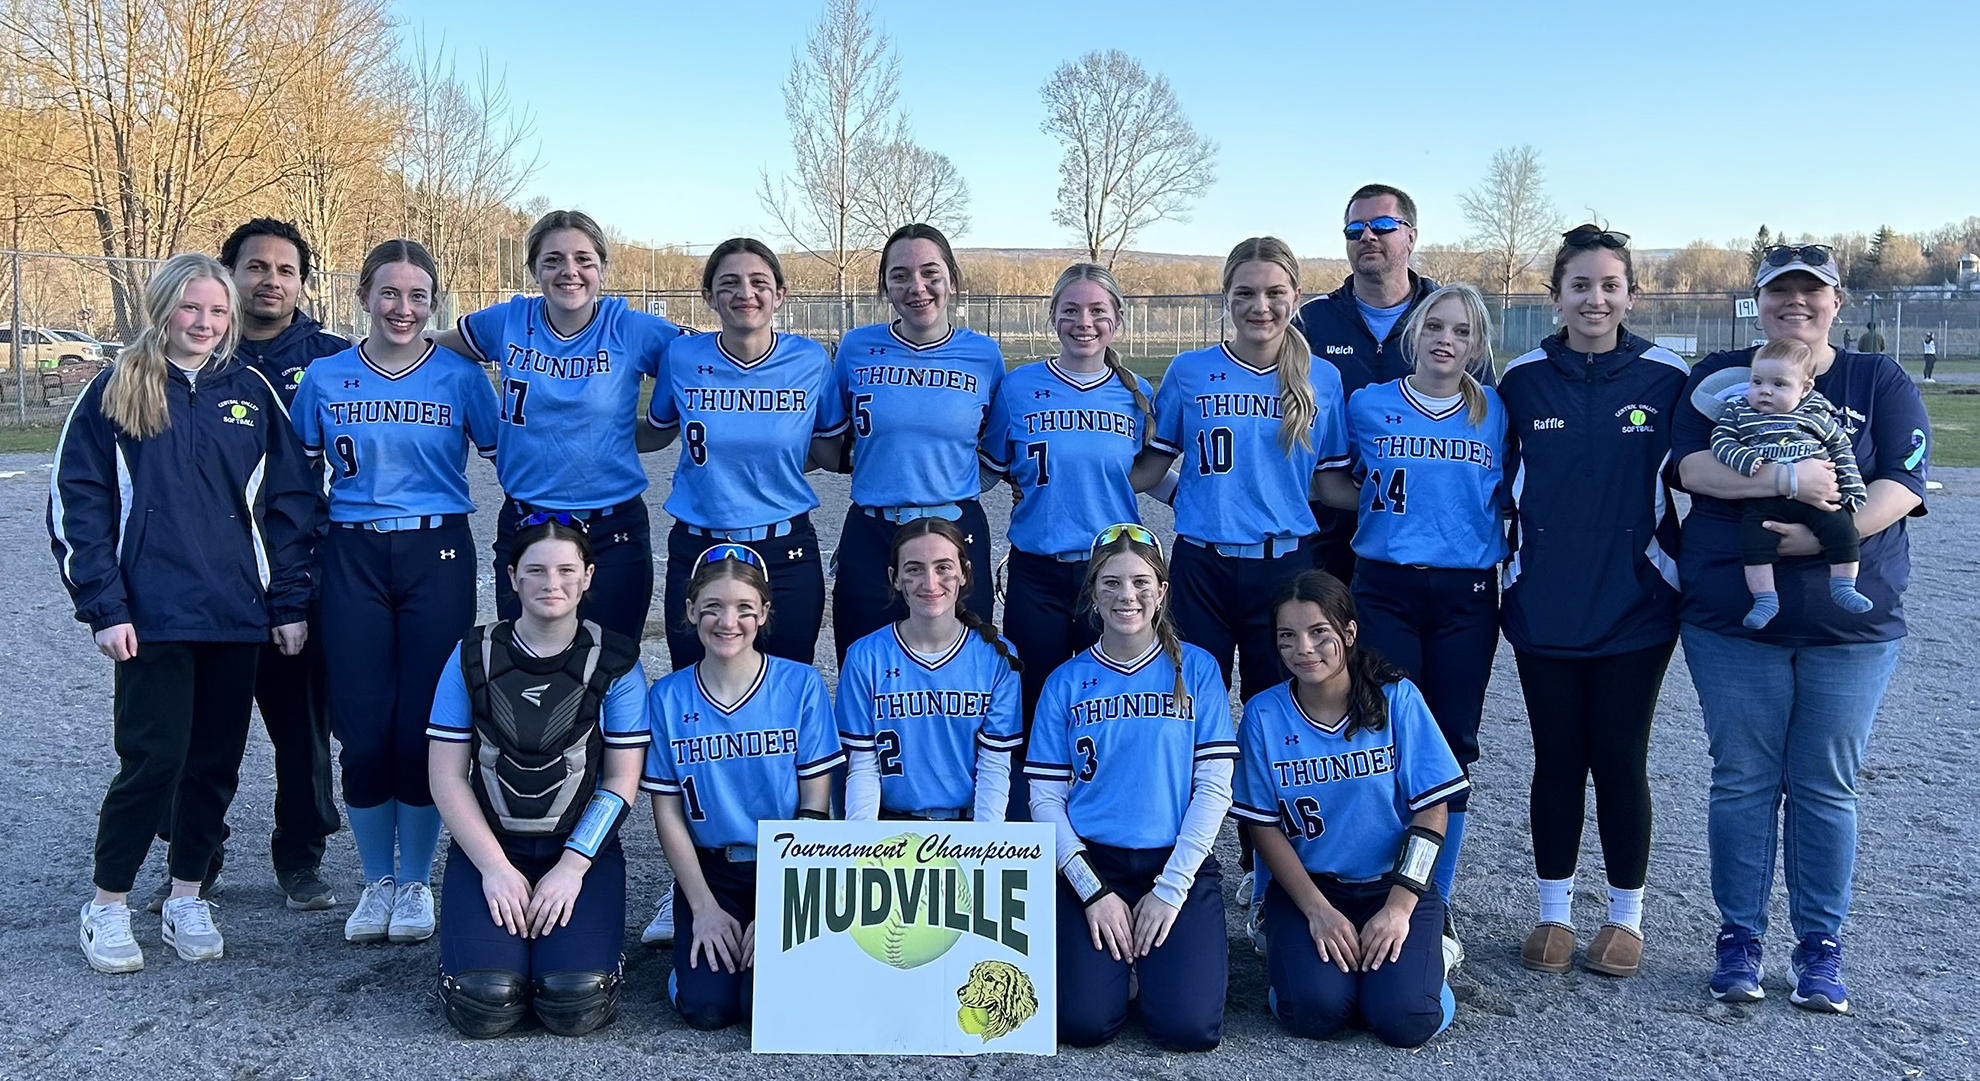 softball players front row seated, back row standing. Sign saying Mudville Tournament Champioins